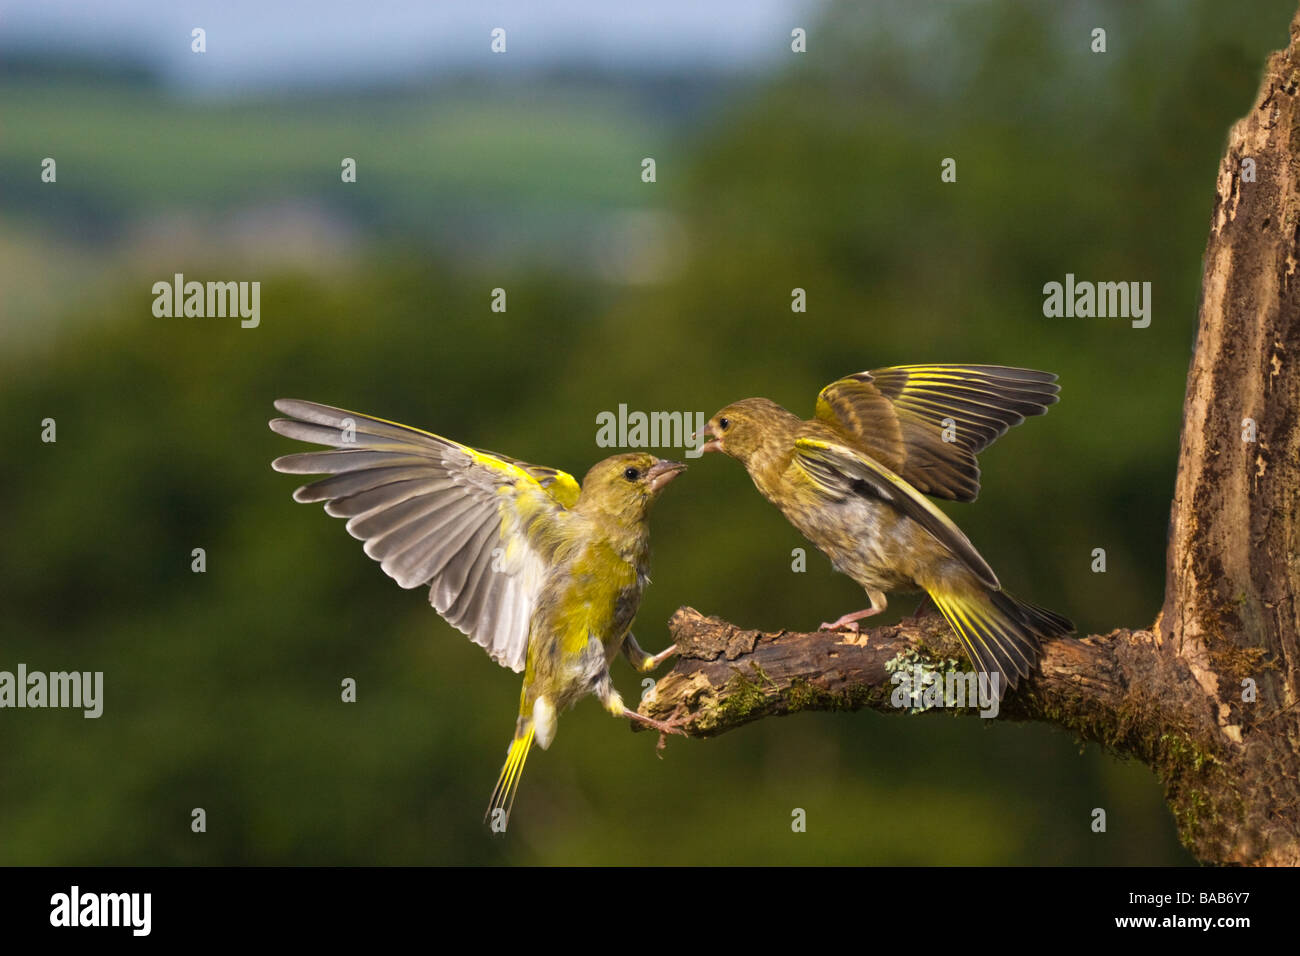 A pair of Greenfinches sparring Stock Photo